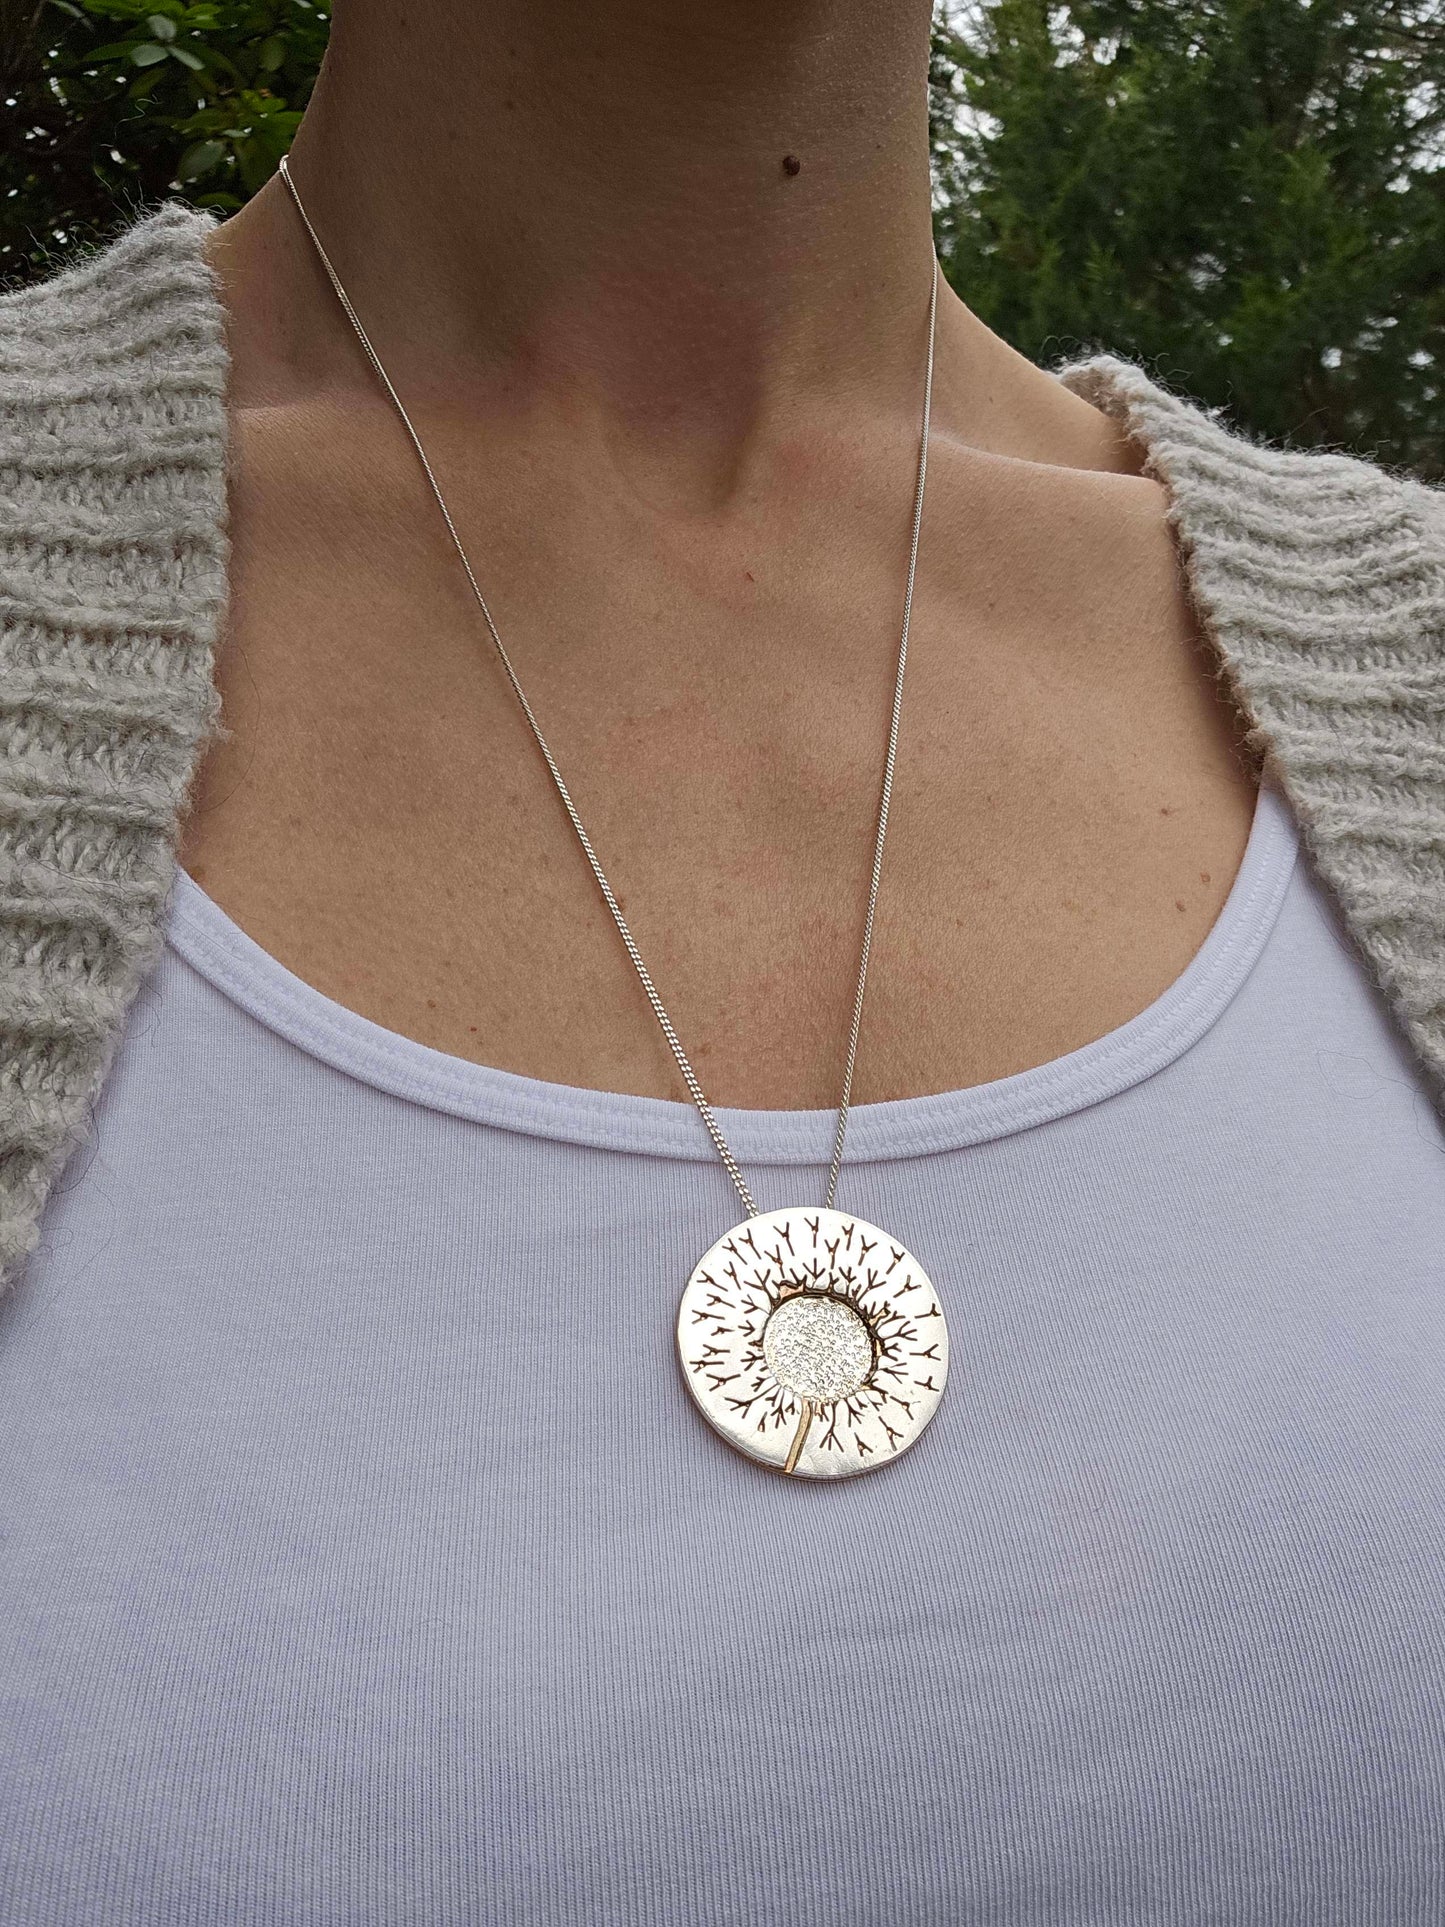 One of a kind handcrafted dandelion necklace worn around woman's neck